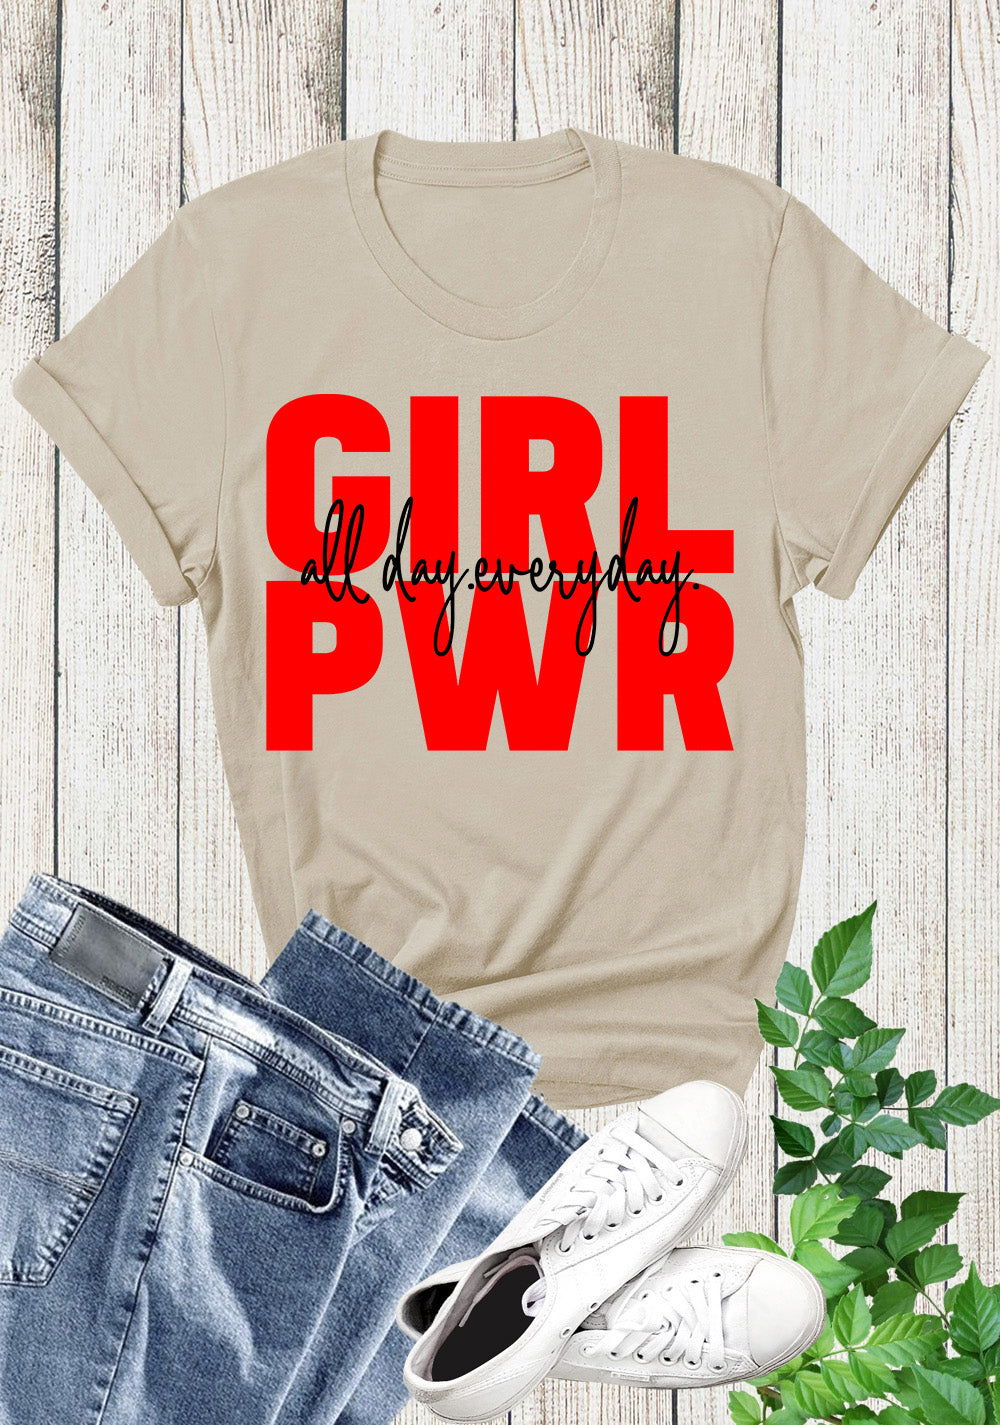 Girls Power All Day Everyday Shirts